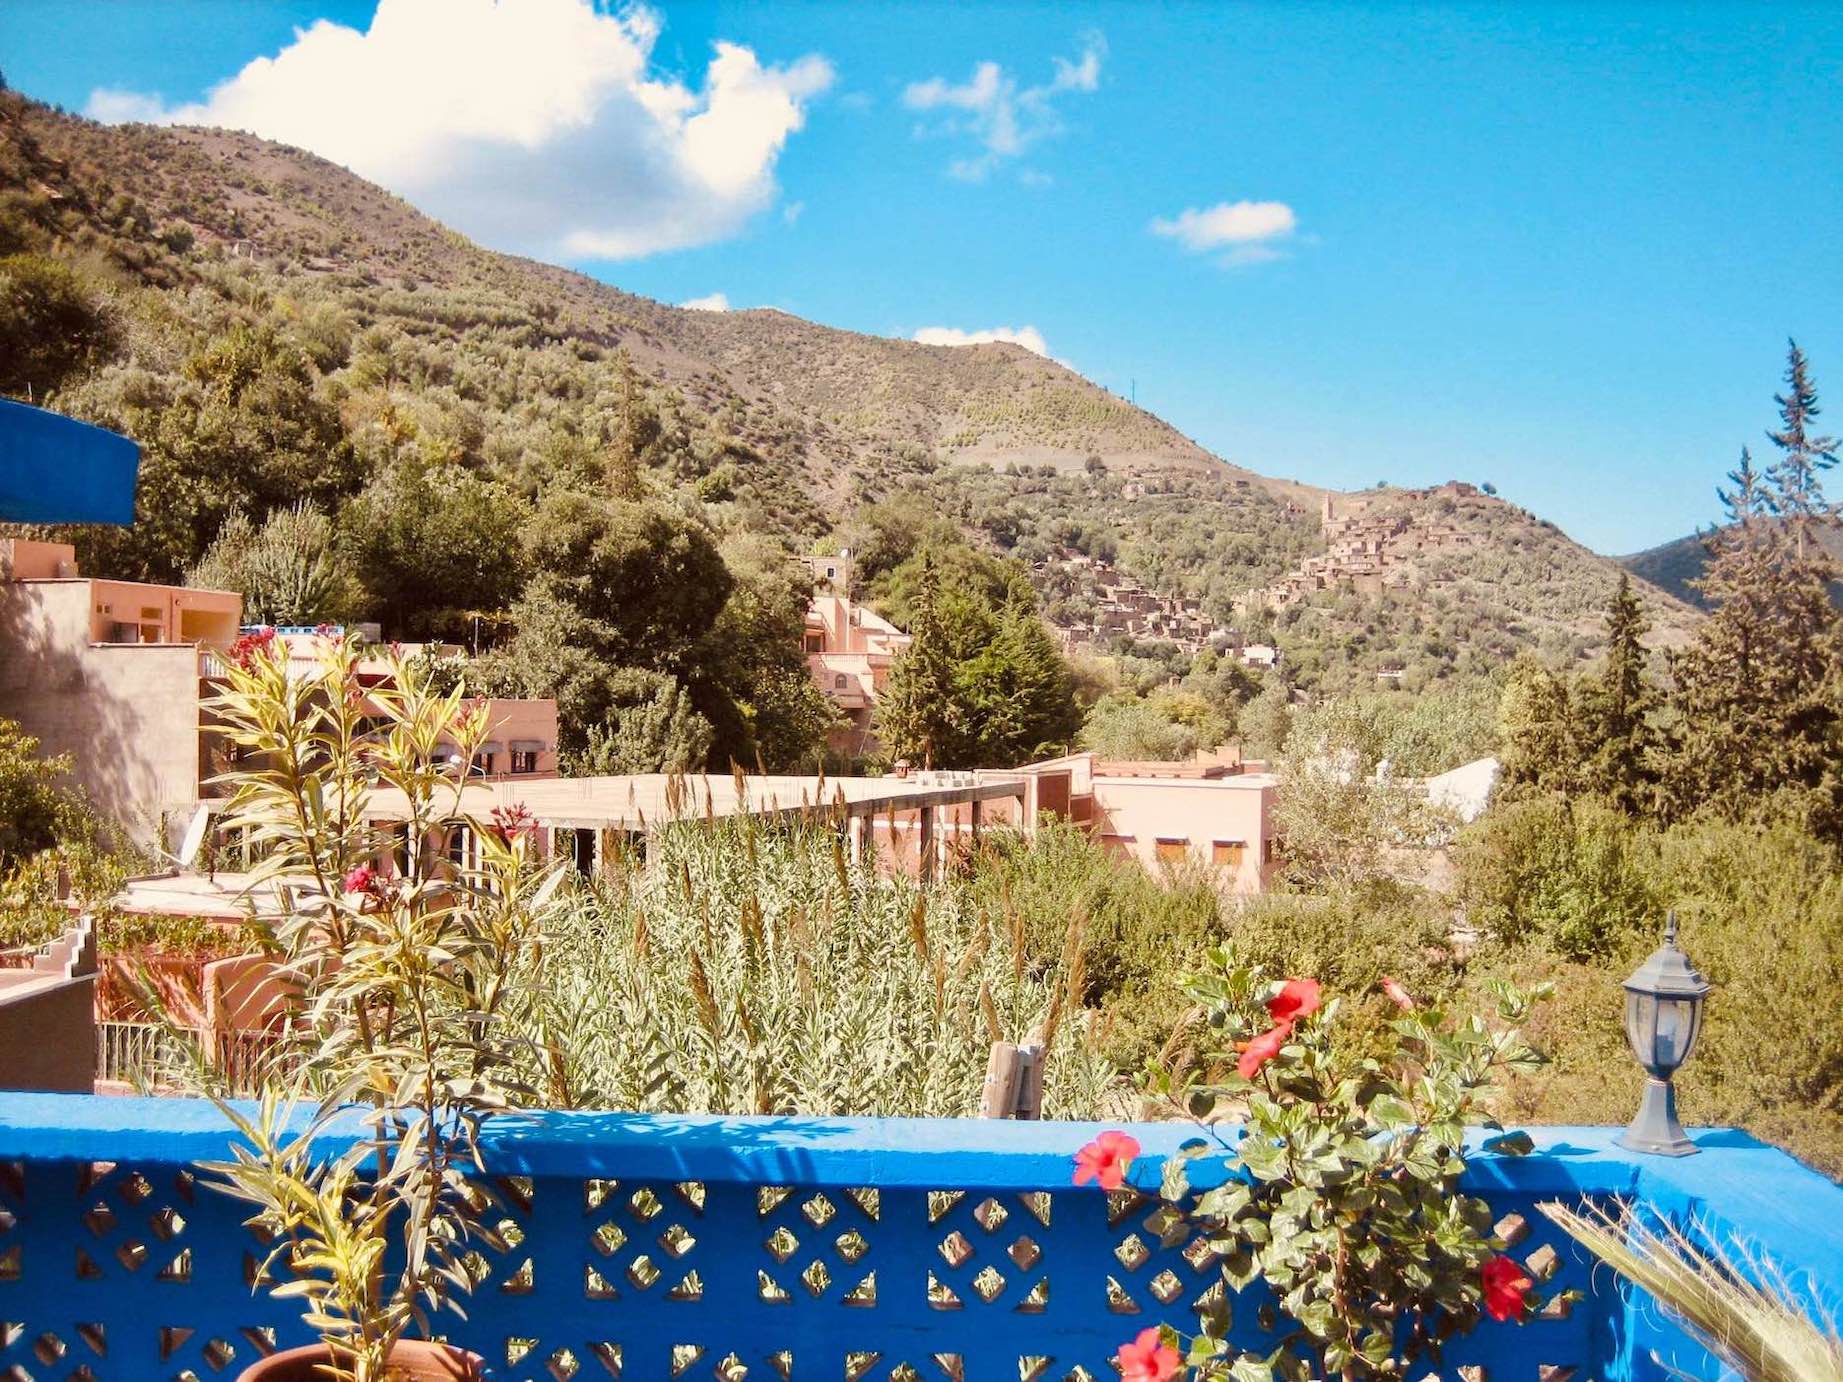 Views from a herb garden Al Haouz Province Morocco